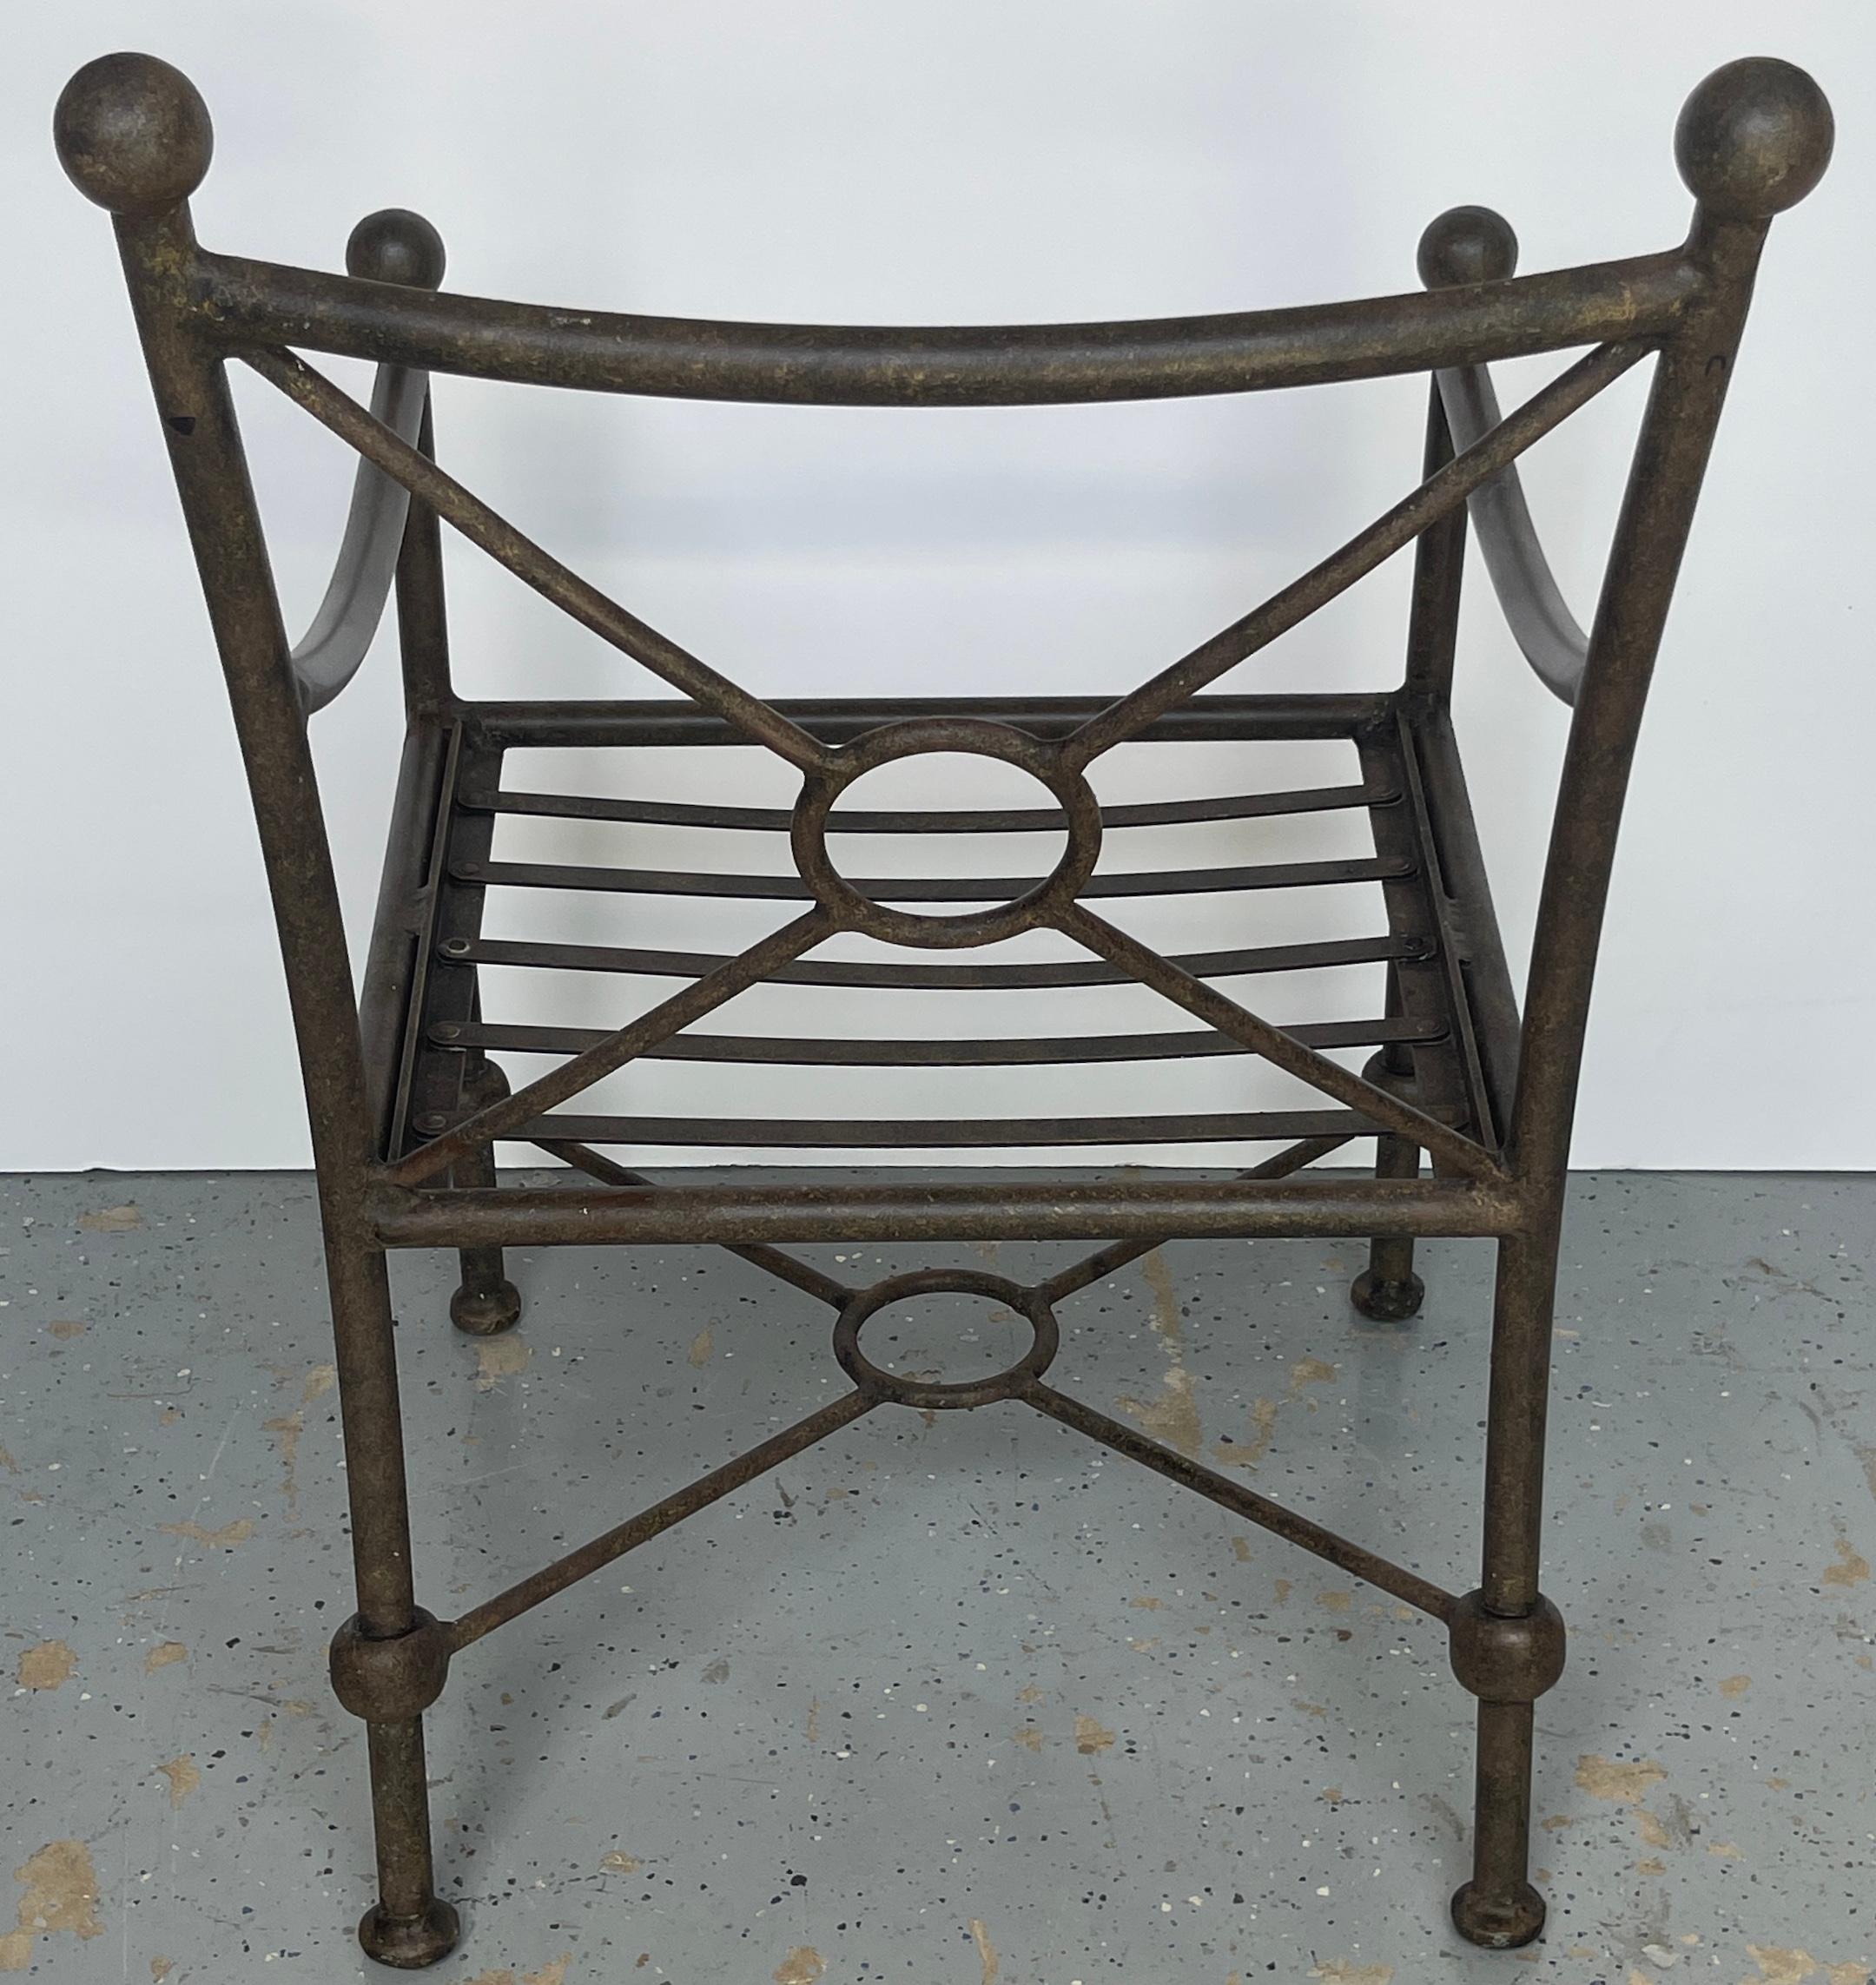 Six  Neoclassical Style Aluminum Garden Arm Chairs by Brown Jordan  2